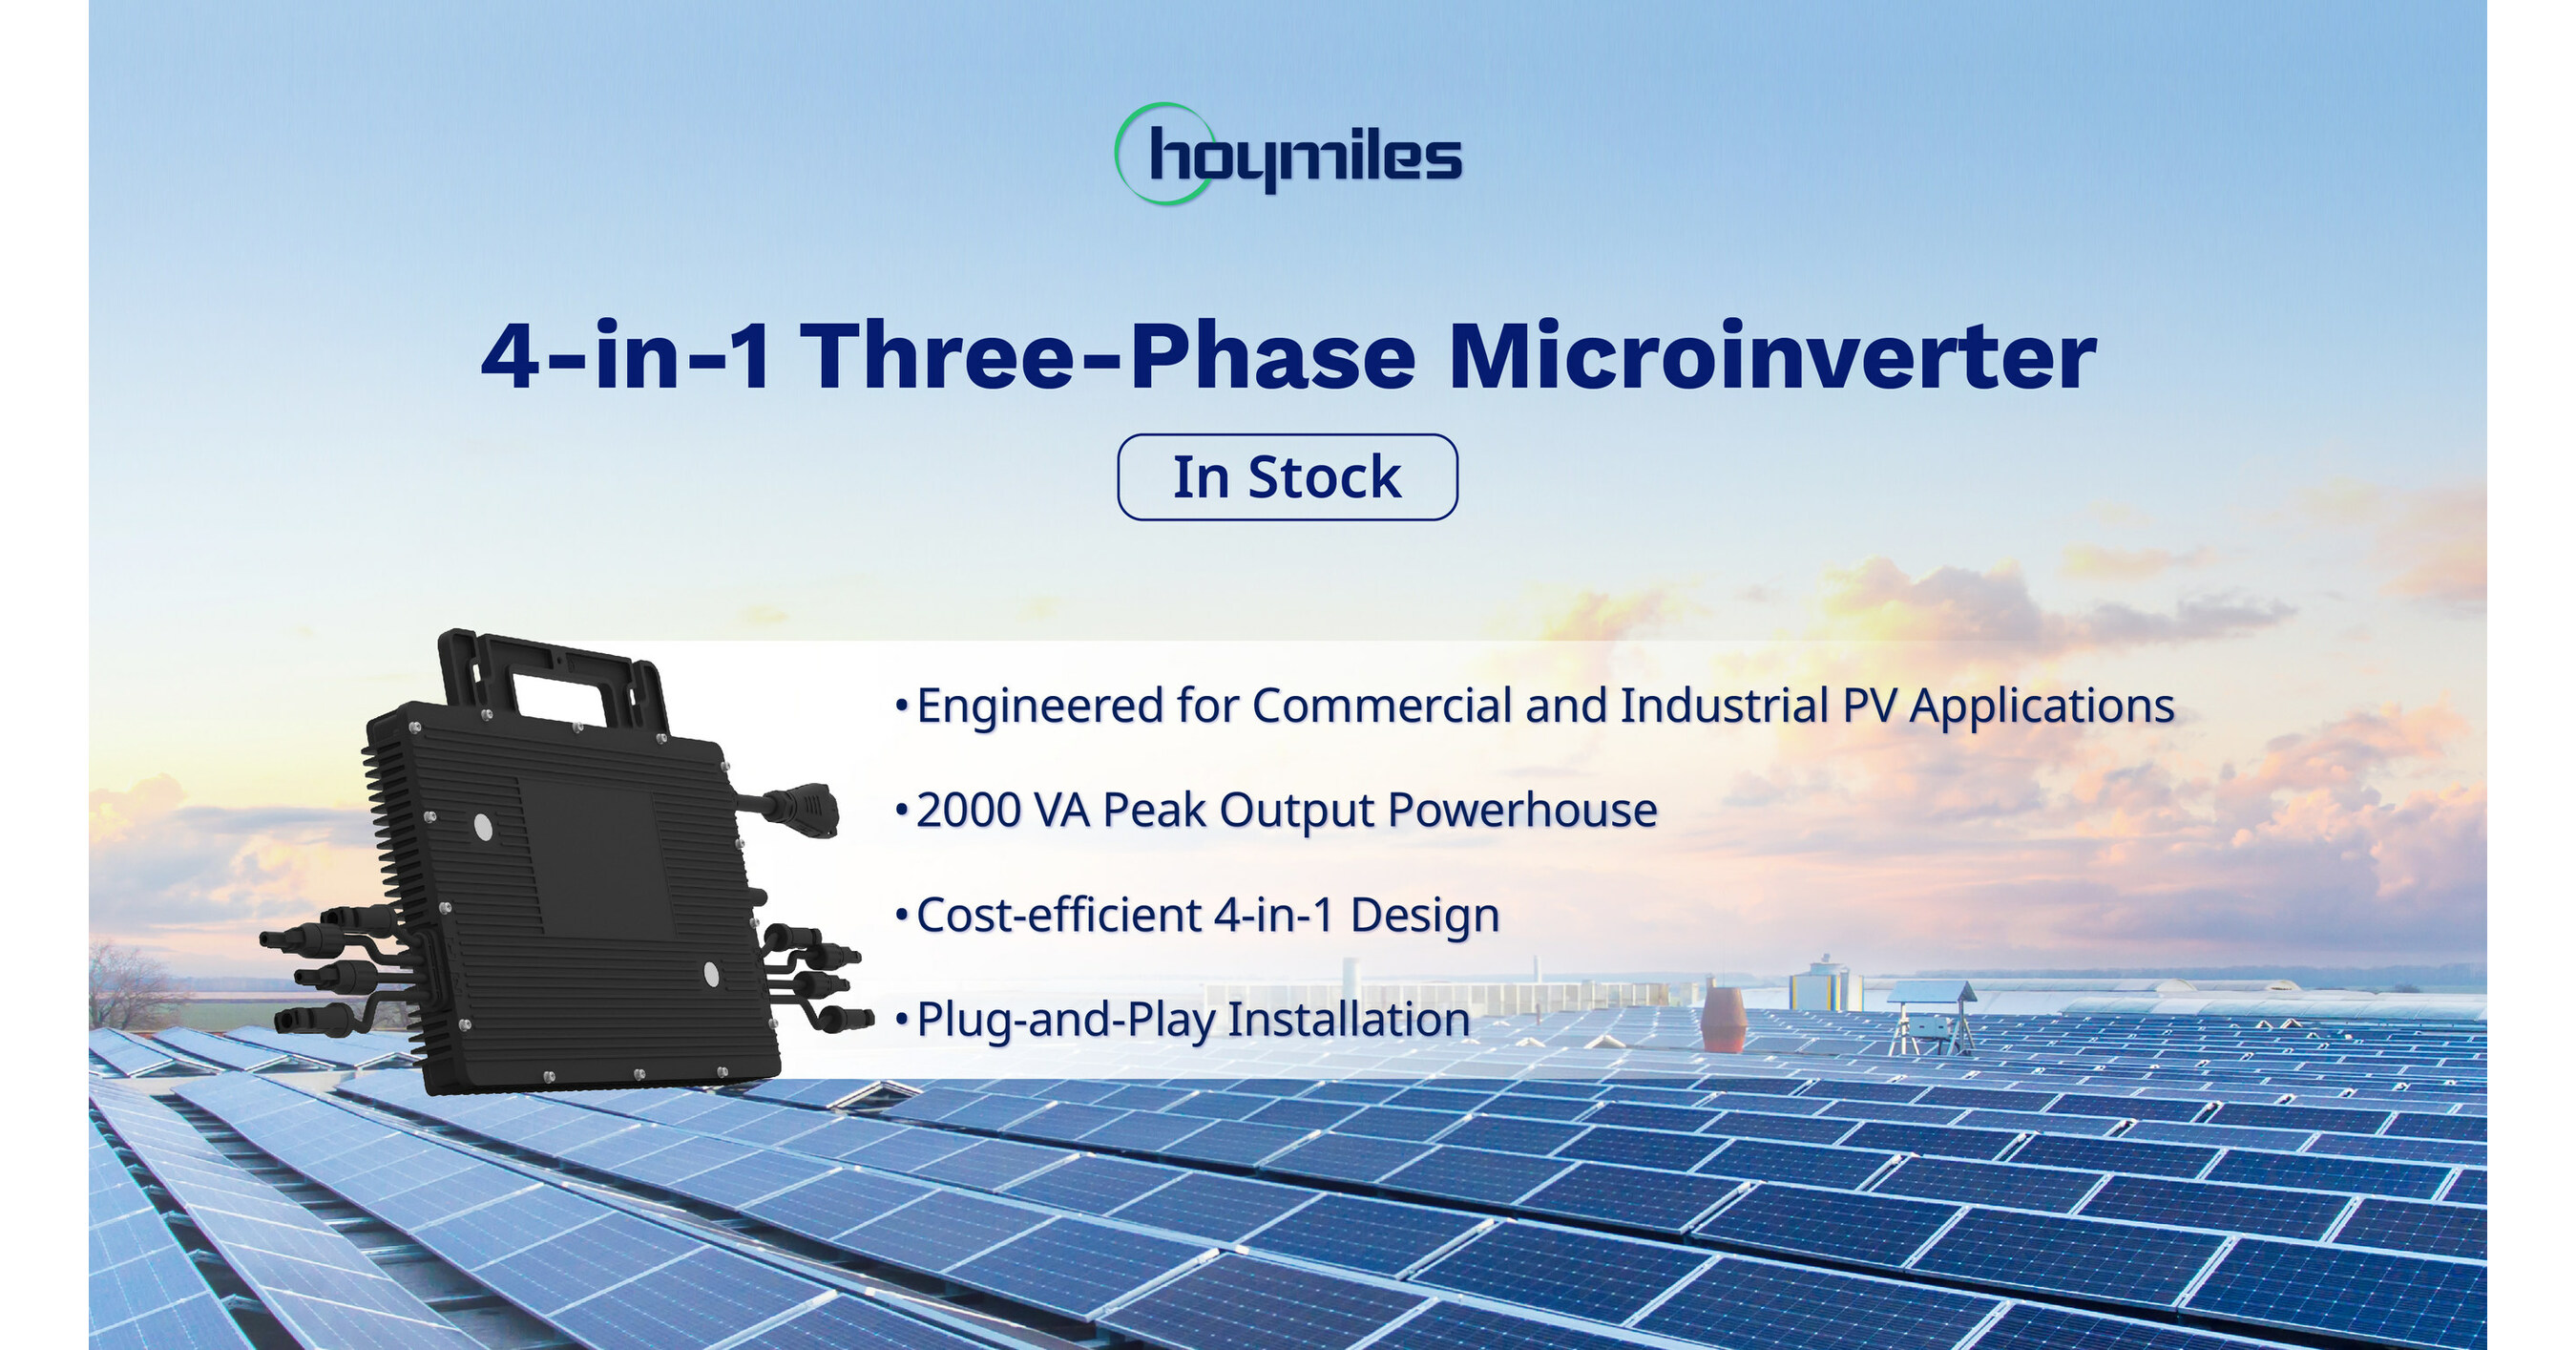 Hoymiles Debuts High-Power 4-in-1 Three-Phase Microinverters to